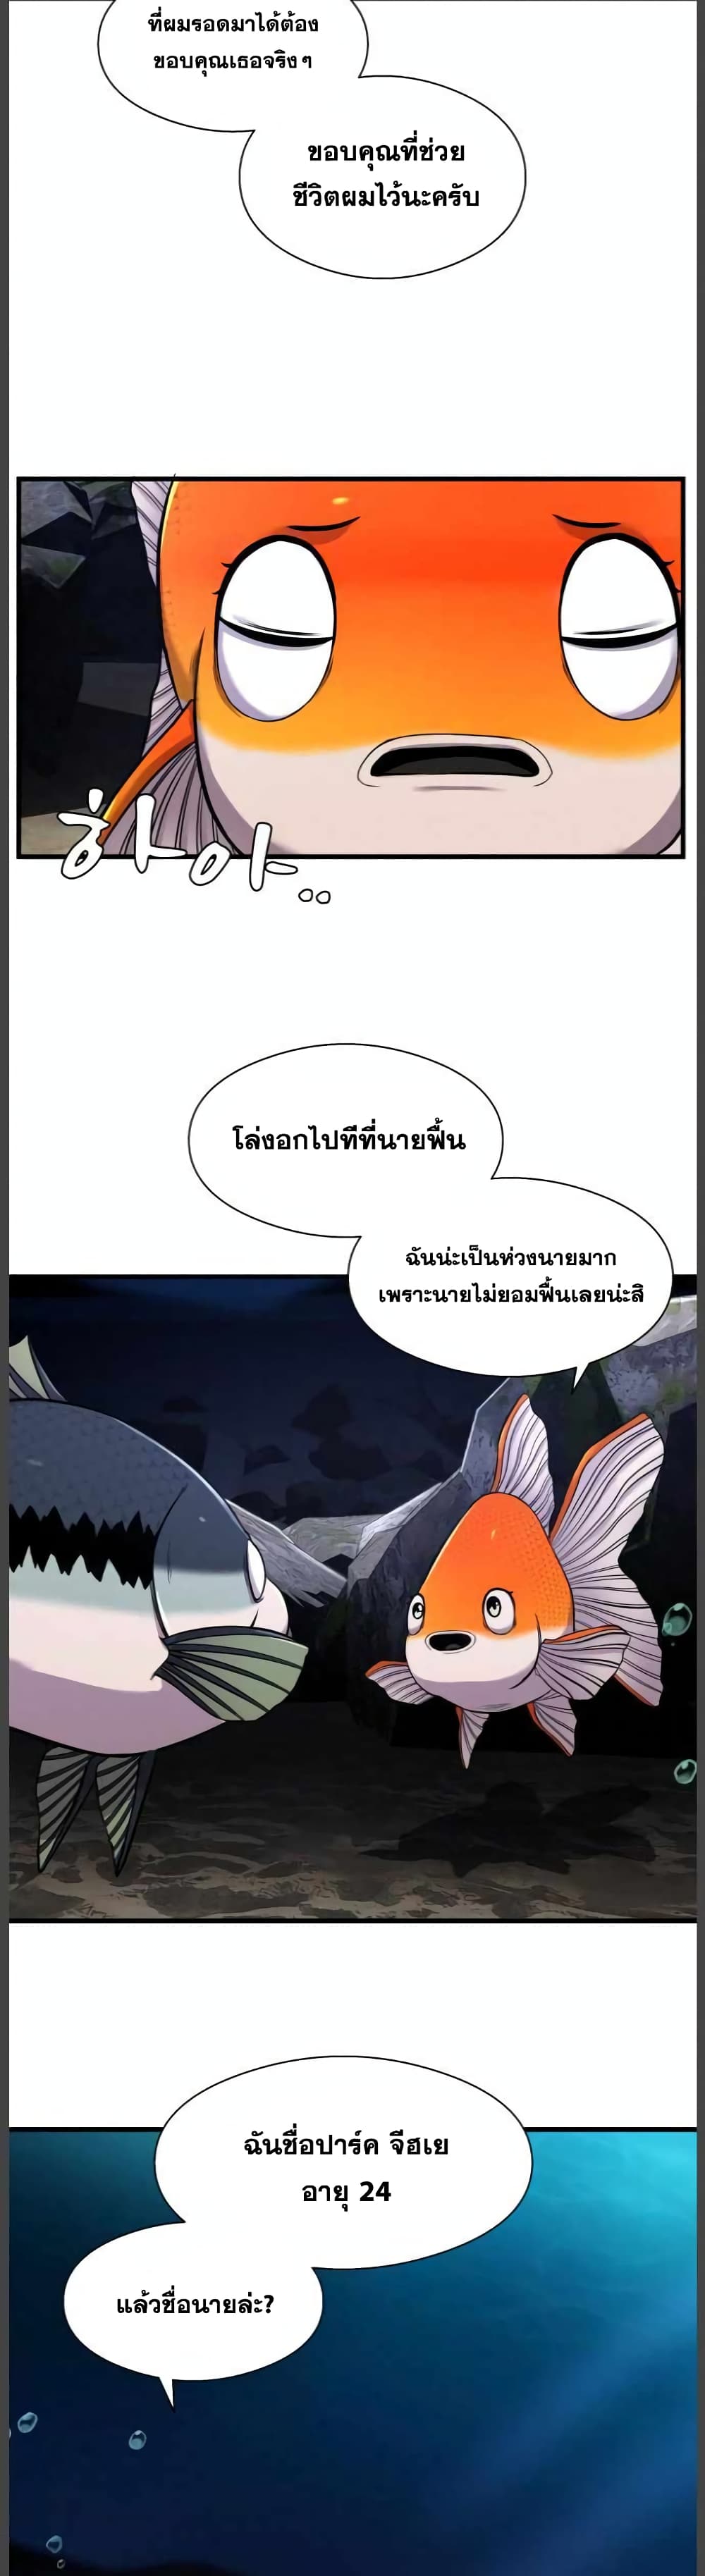 Surviving As a Fish 9 (23)